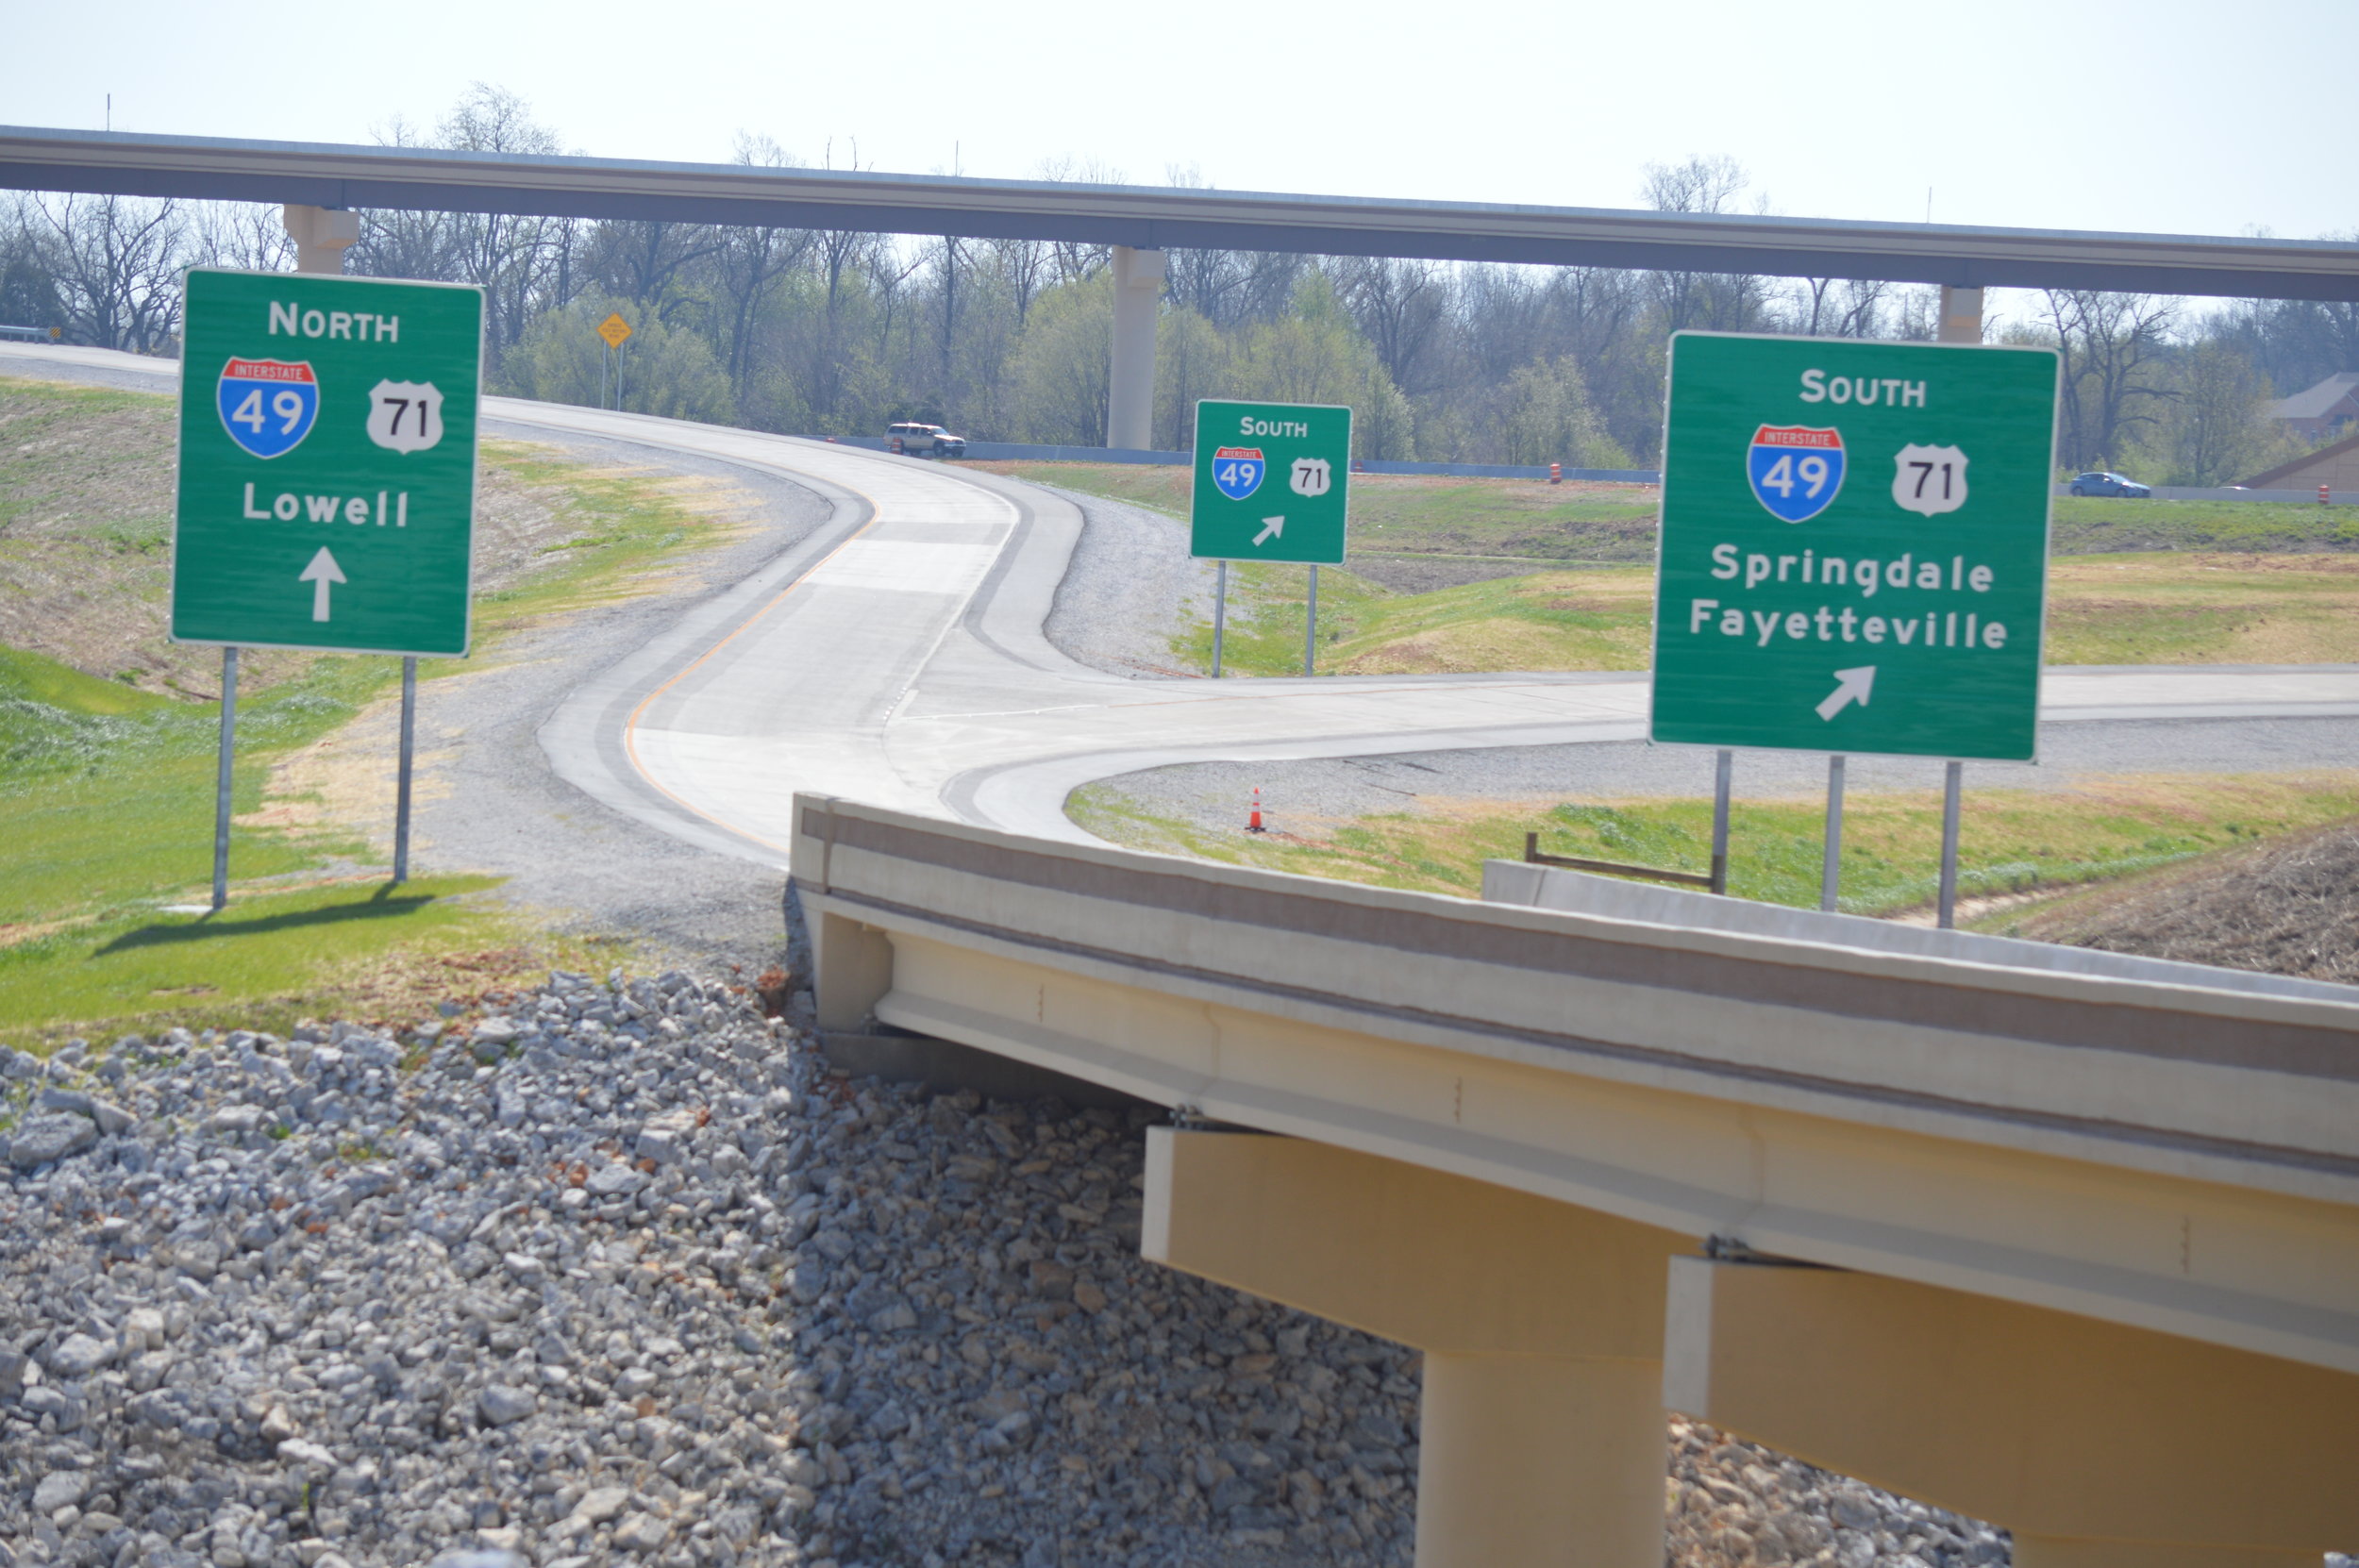 Those headed east on the new Arkansas Highway 612 will use a series of bridges and ramps before heading north or south on Interstate 49. The new highway should be open to traffic later this month.